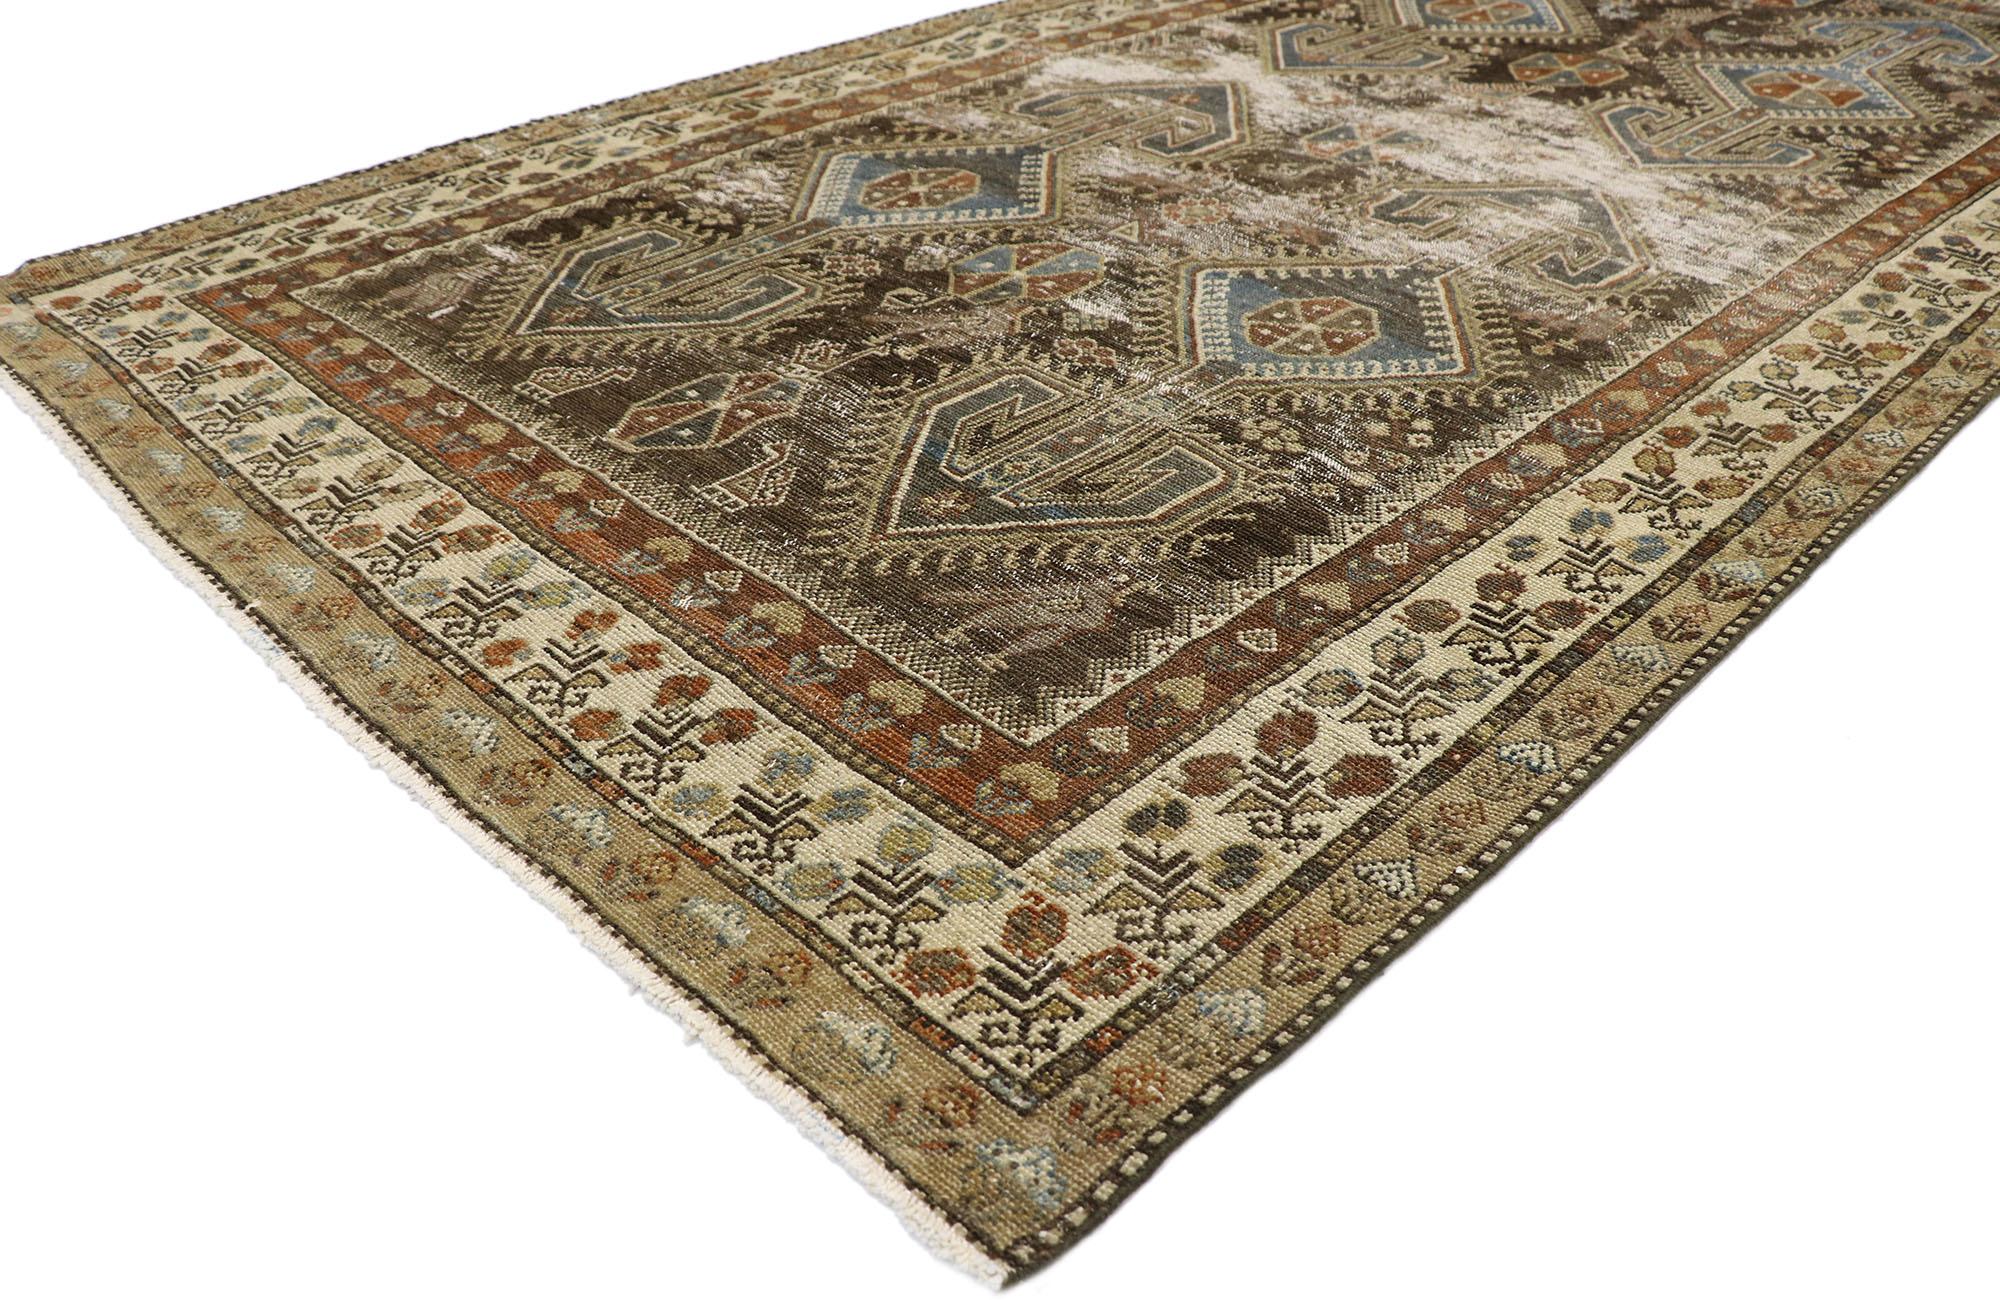 60825, distressed antique Persian Malayer rug with rustic artisan tribal style 05'03 x 09'08. Cleverly composed and distinctively well-balanced, this hand knotted wool distressed antique Persian Malayer runner will take on a curated lived-in look